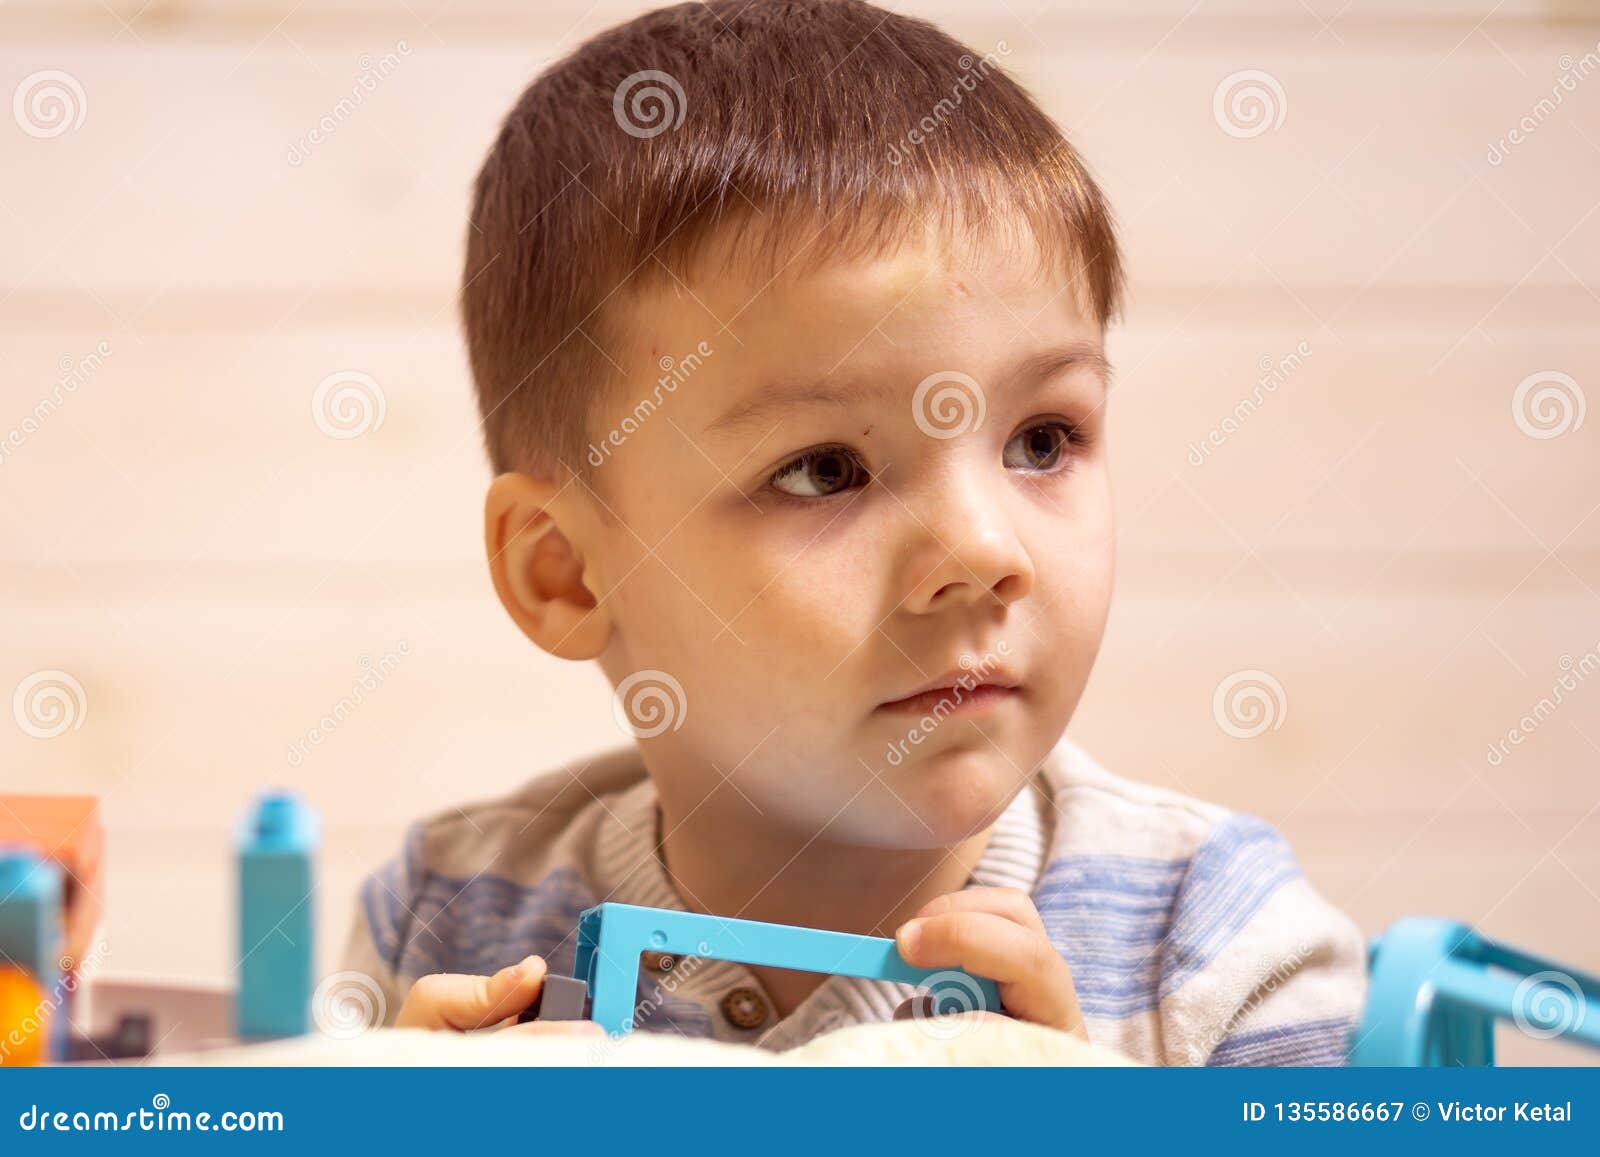 Little Boy Plays With Toy Car At Home Stock Image Image Of Education